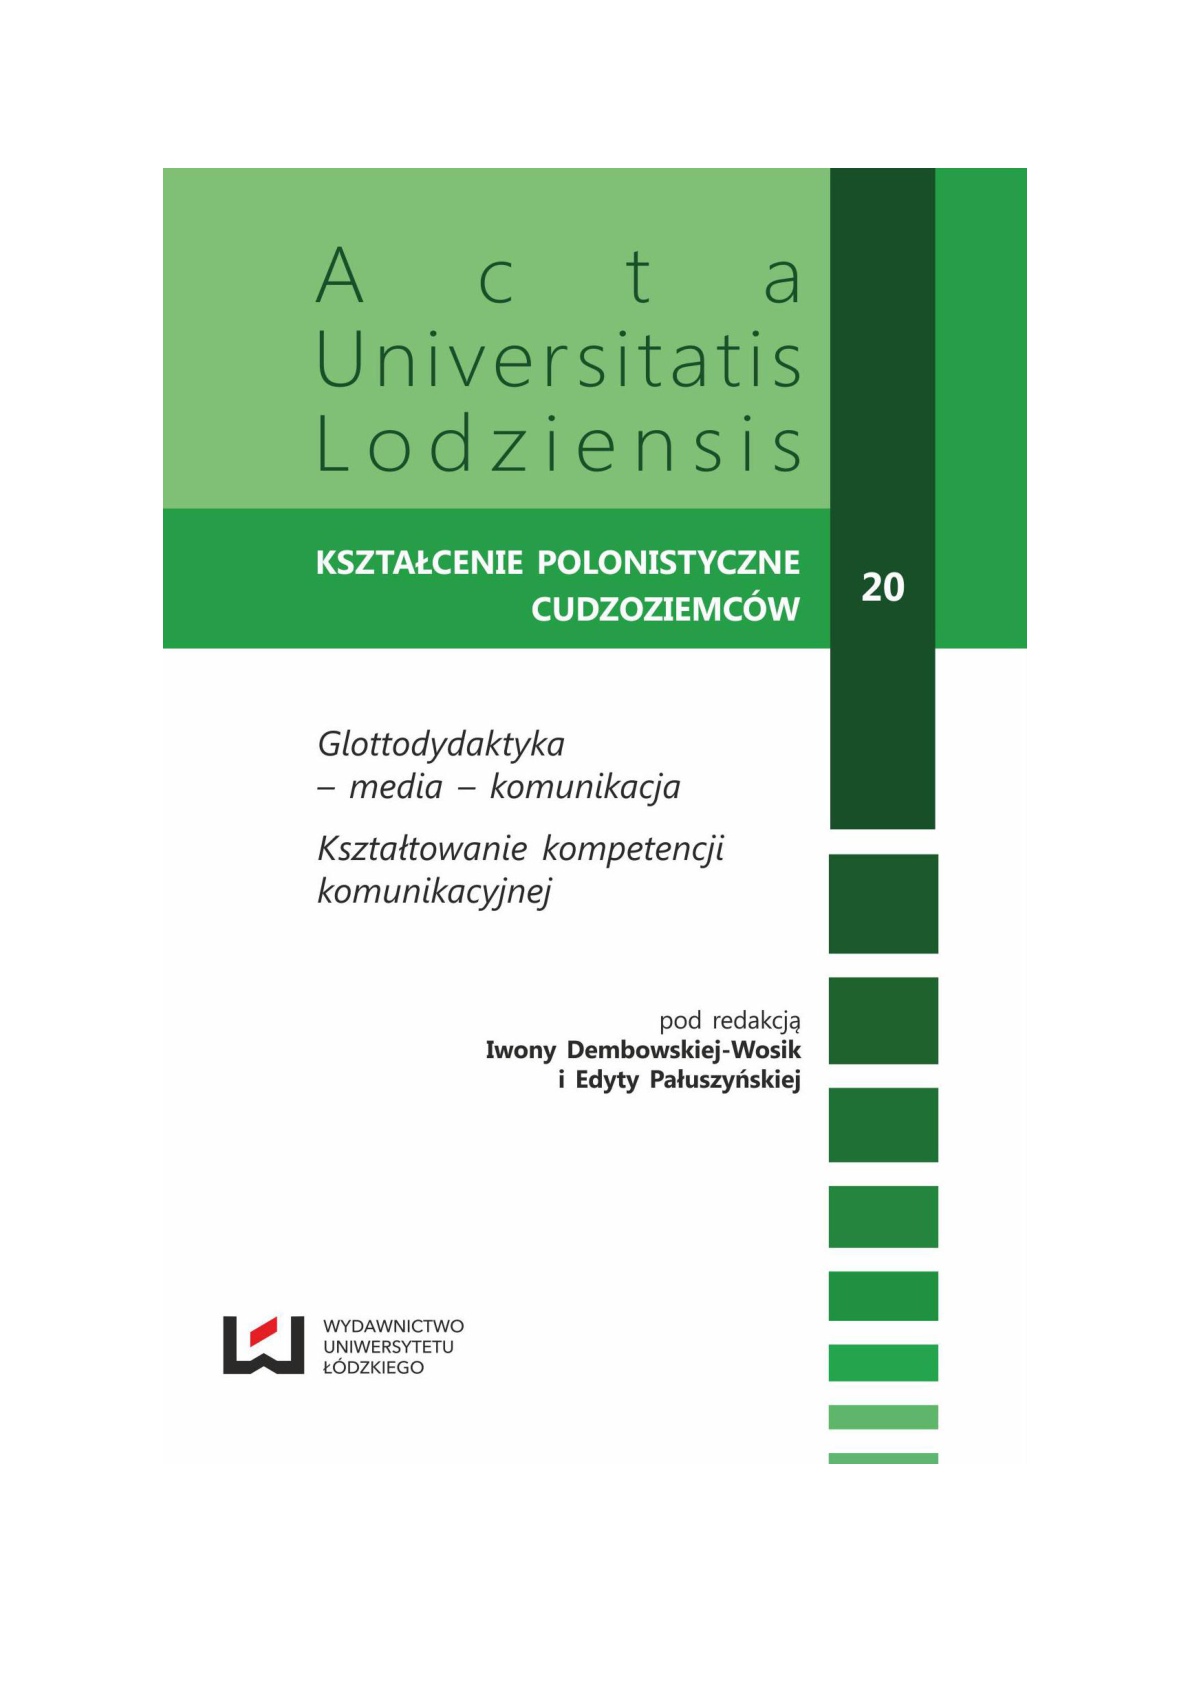 HOW FOREIGN CELEBRITIES SPEAK POLISH IN THE TELEVISION PROGRAMMES (INTERPERSONAL COMPETENCE) Cover Image